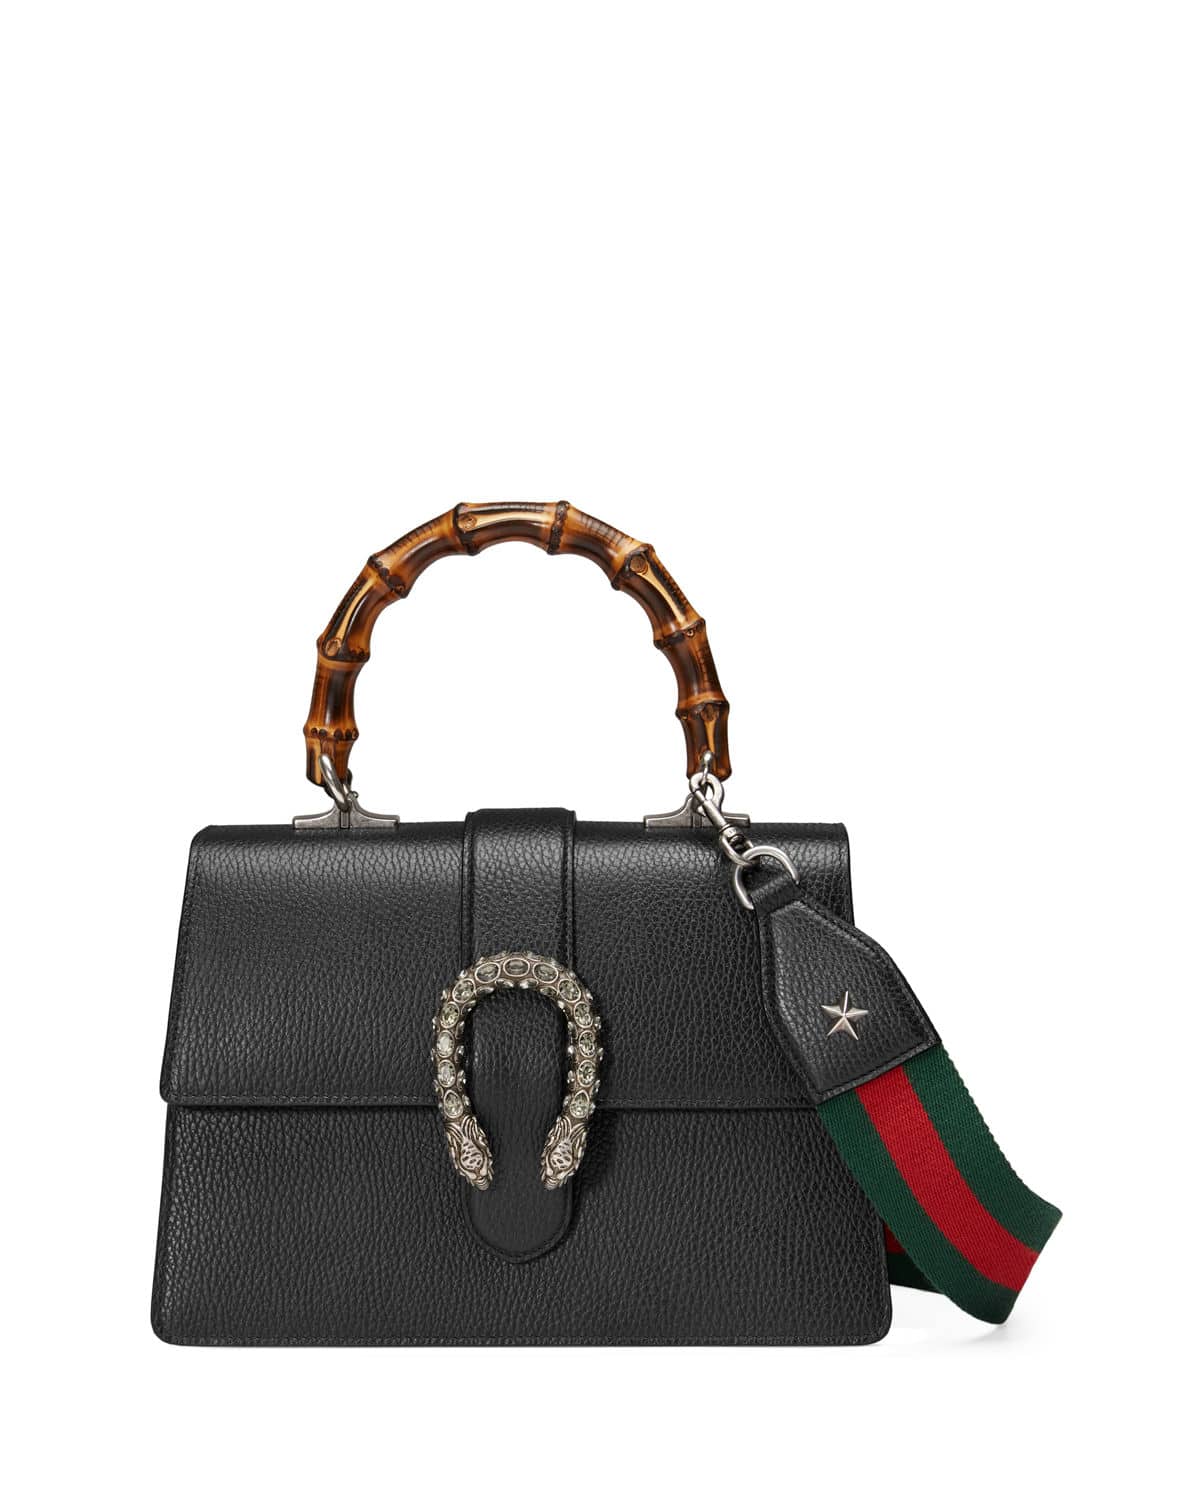 Restricted Gucci Sneakers Auction At Gucci Outlet On-line - gucci bags online - Yupoo Gucci